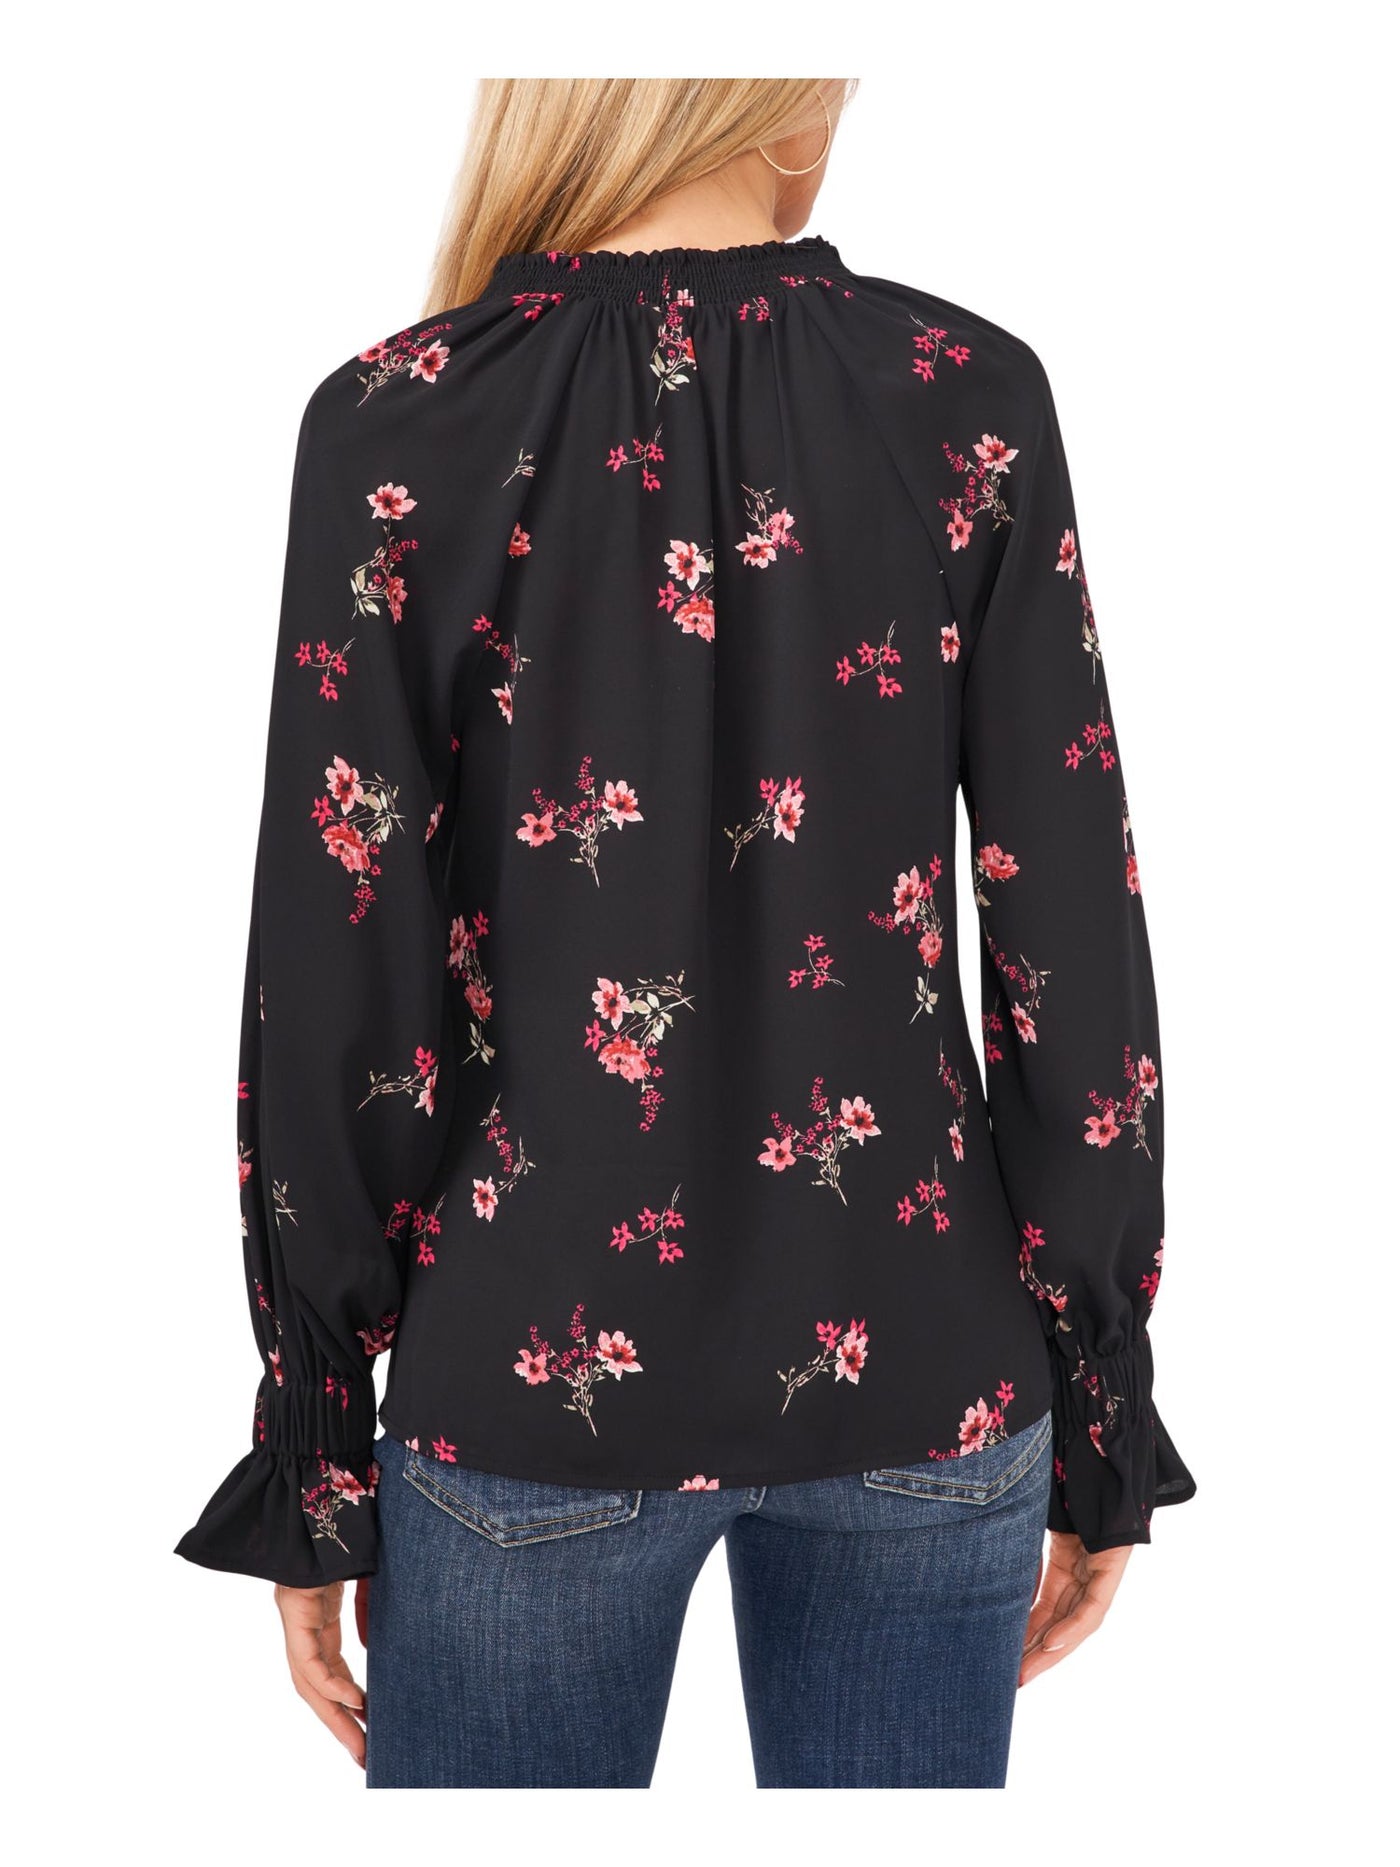 VINCE CAMUTO Womens Black Smocked Shirred Back Bell Cuffs Floral Long Sleeve Split Top XS